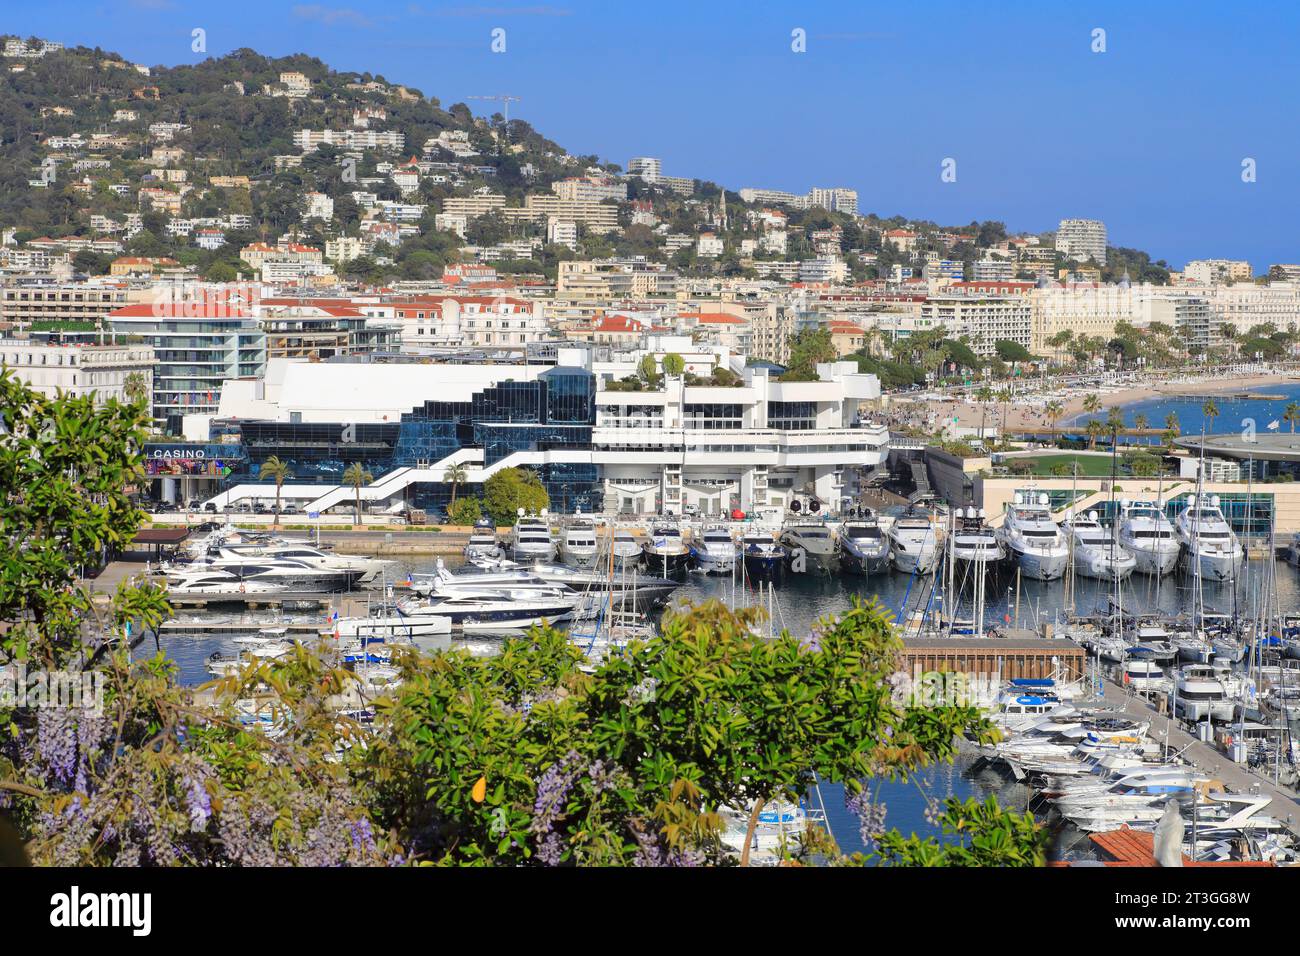 France, Alpes Maritimes, Cannes, view from Le Suquet on the Old Port, its moored boats, the Palais des festivals et des Congres Stock Photo